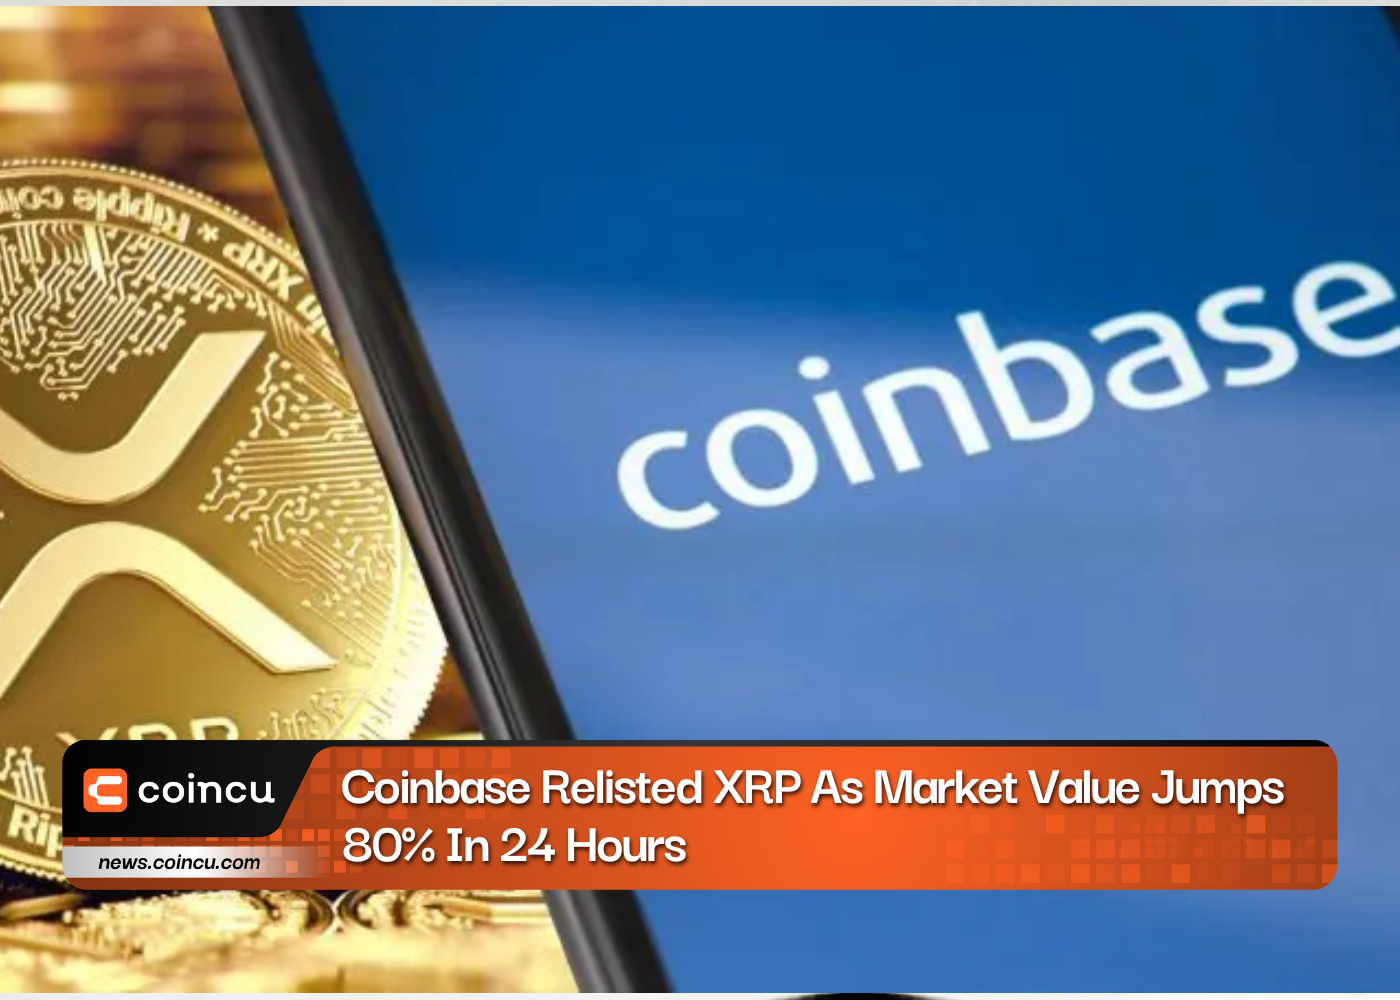 Coinbase Relisted XRP As Market Value Jumps 80% In 24 Hours